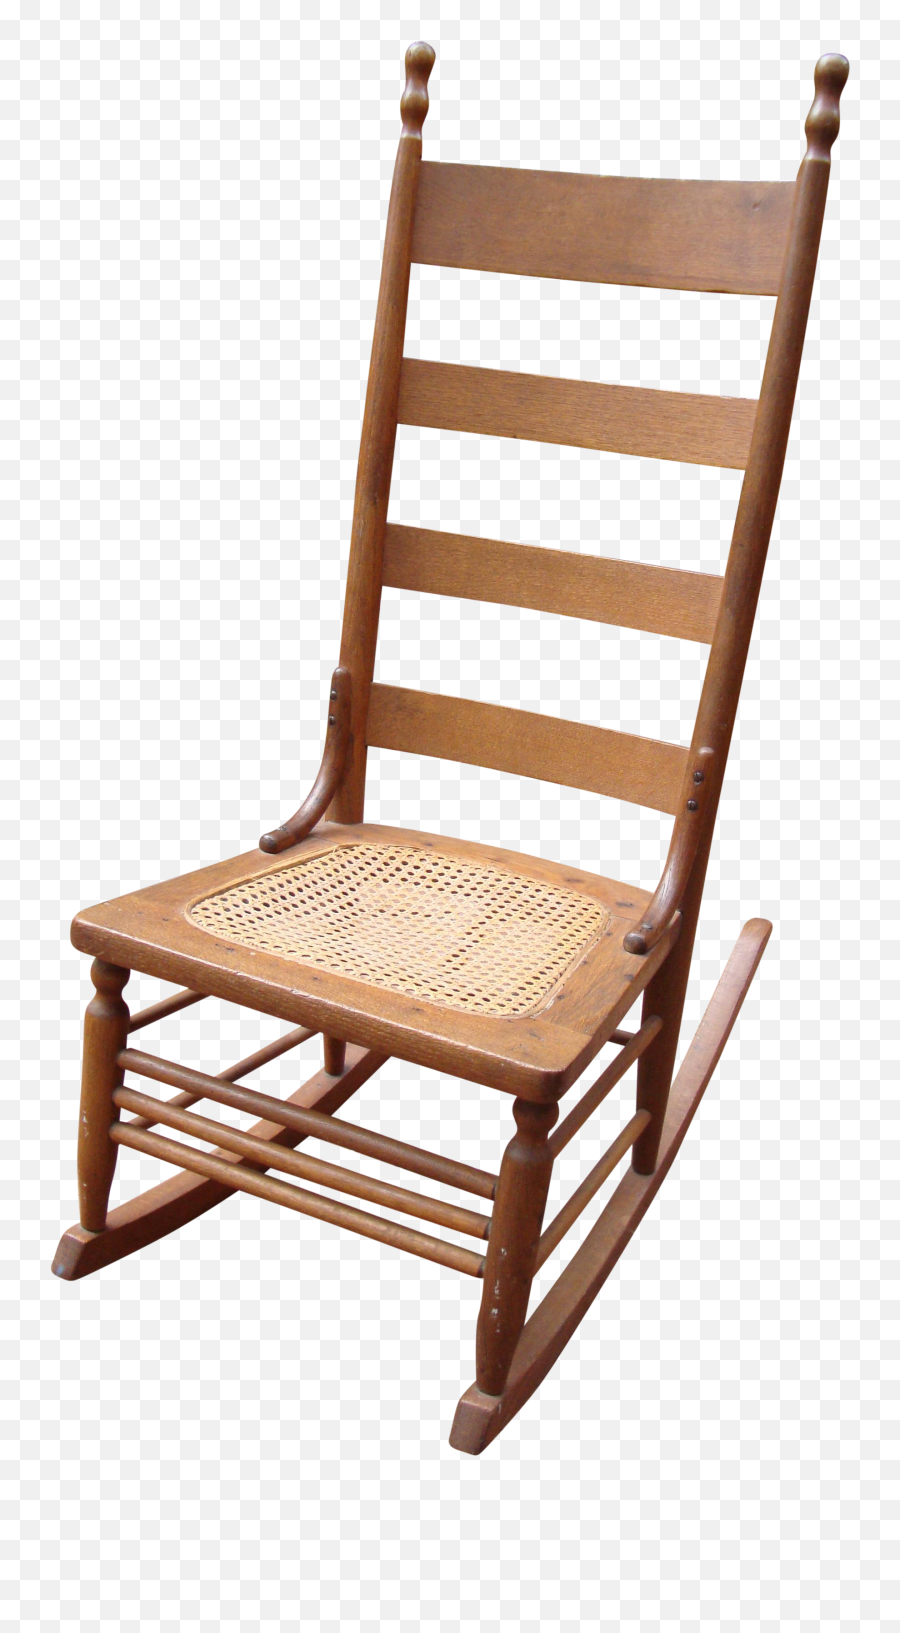 Drawing Chairs Rocking Chair - Transparent Rocking Chair Cartoon Emoji,Rocking Chair Emoji